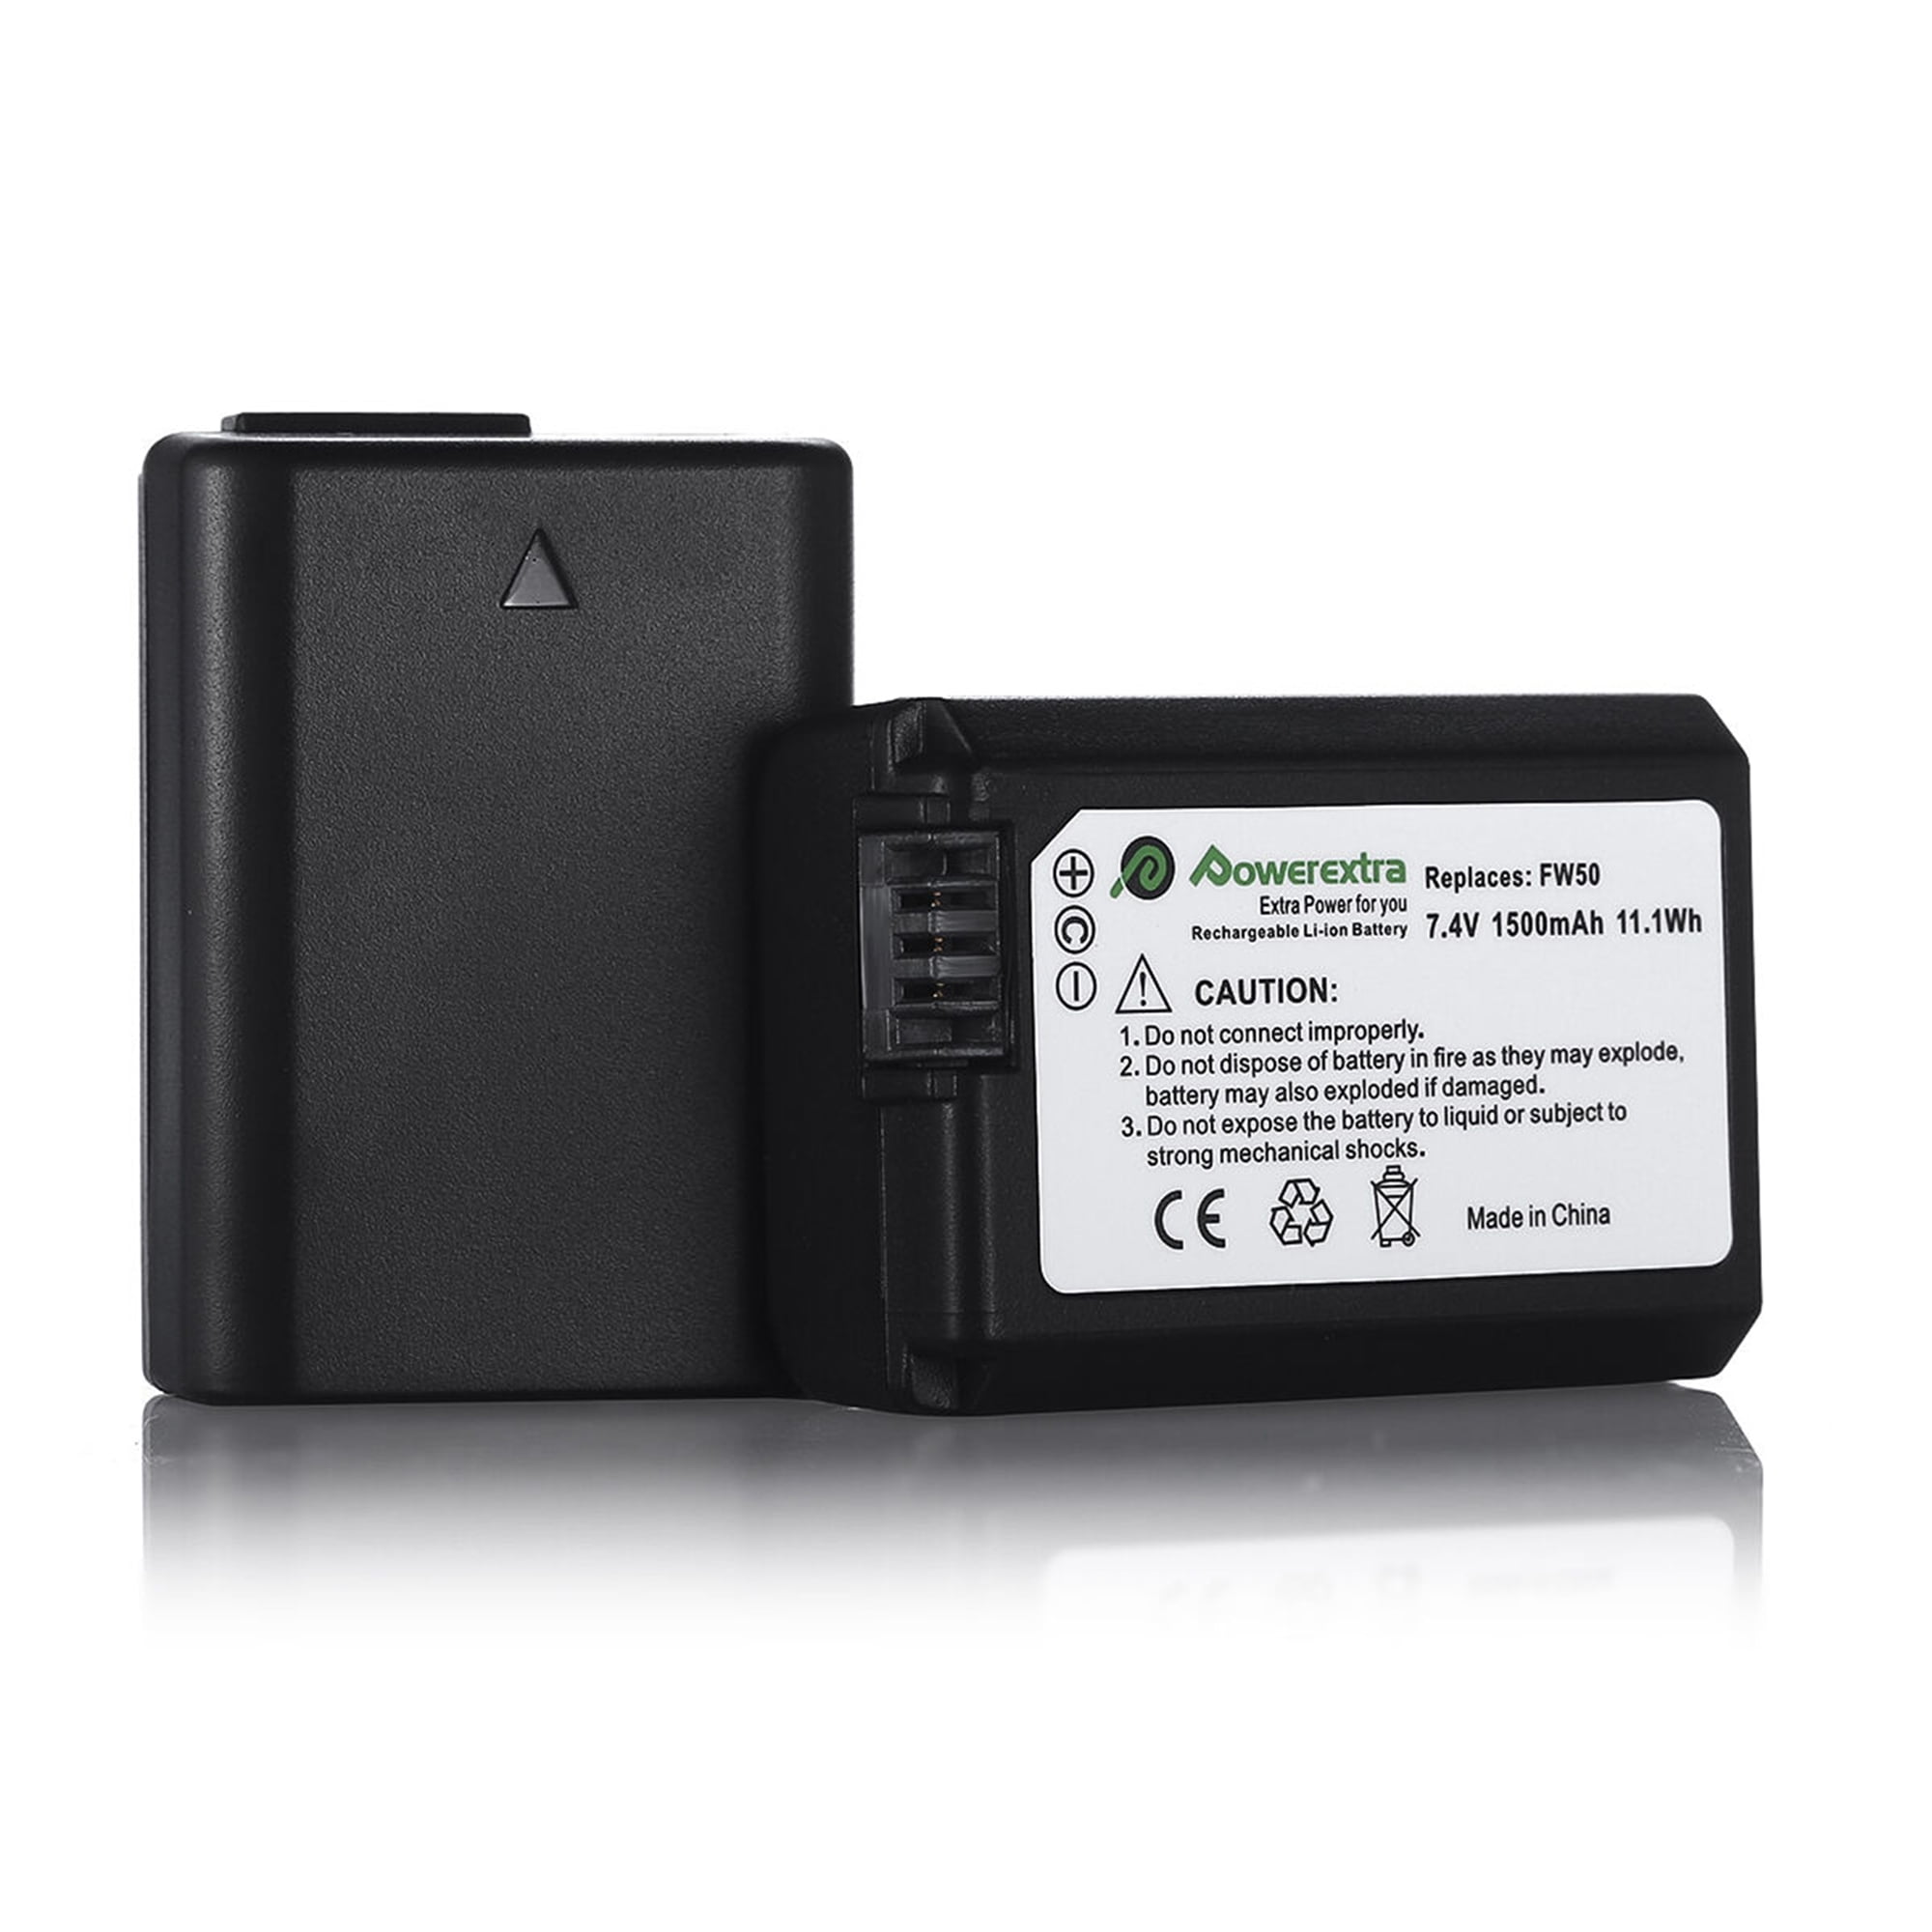 7.4V 1500mAh Replacement NP-FW50 Battery for Sony NEX-3N NEX-5T